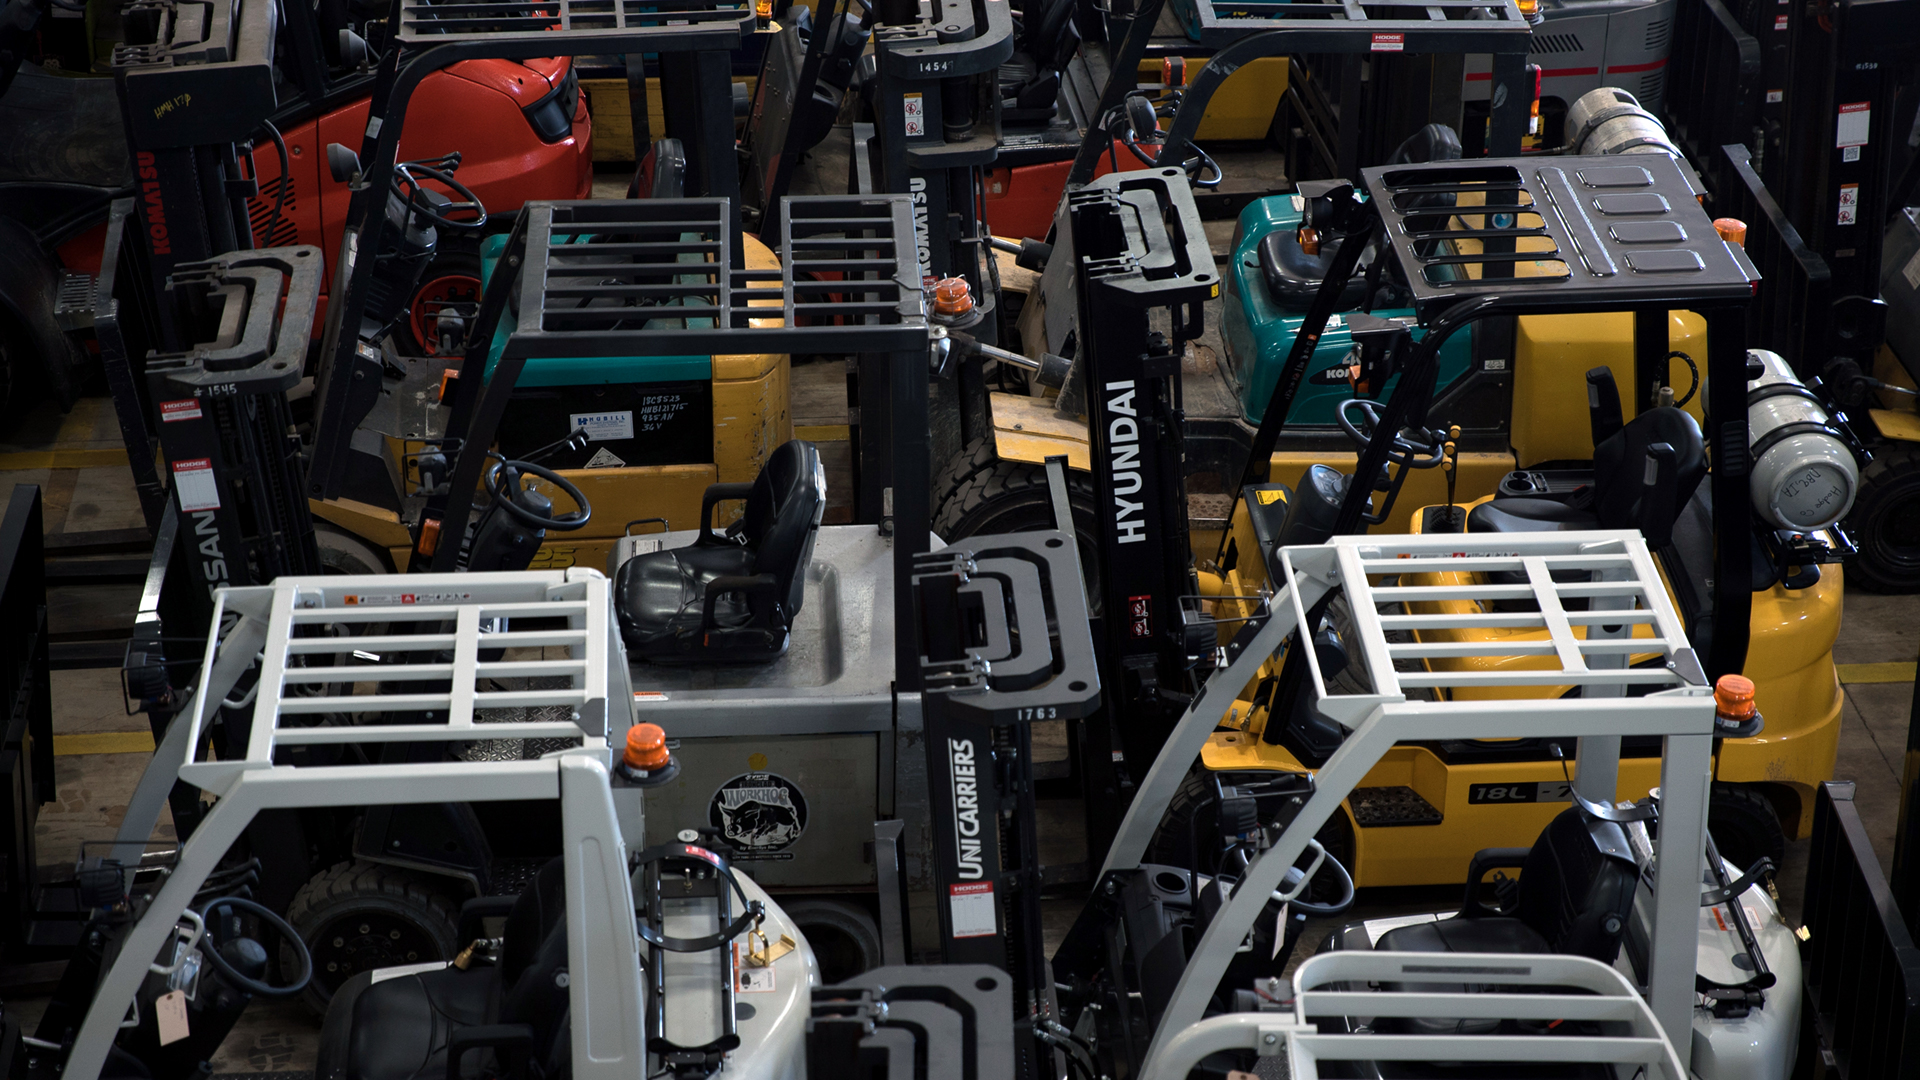 Find Out How To Value Your Forklift Equipment